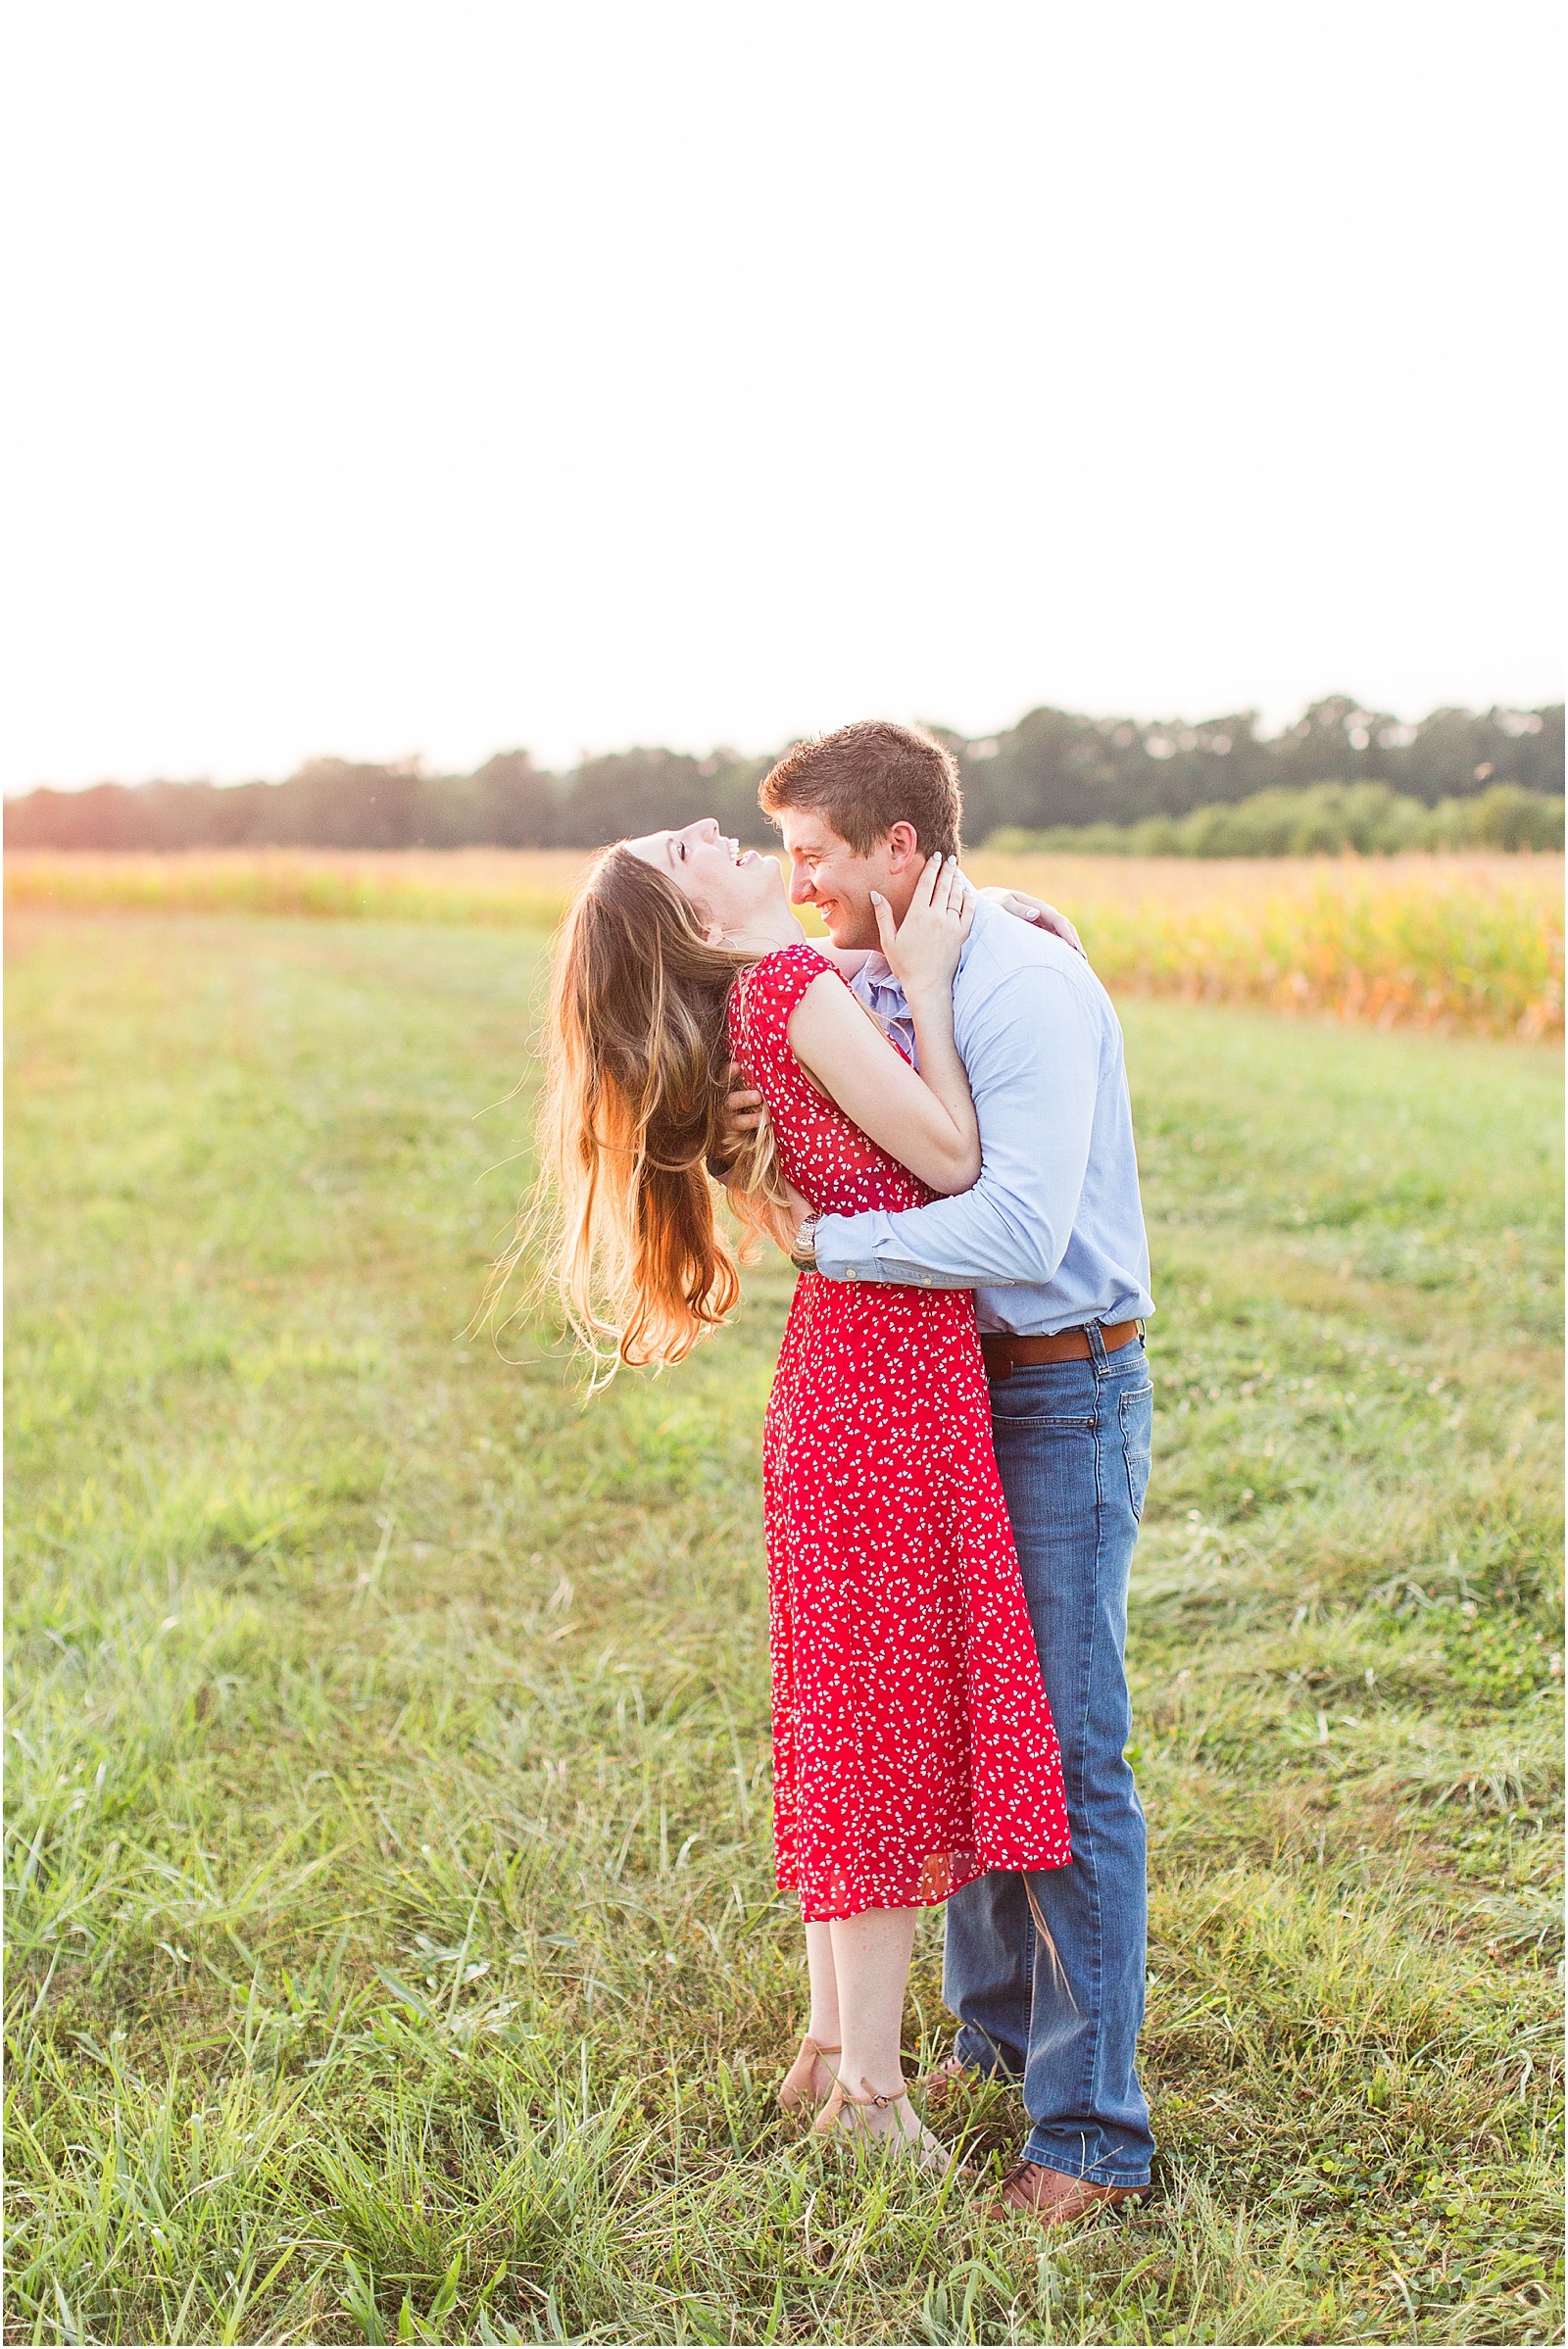 A Jasper Indiana Engagement Session | Tori and Kyle | Bret and Brandie Photography049.jpg